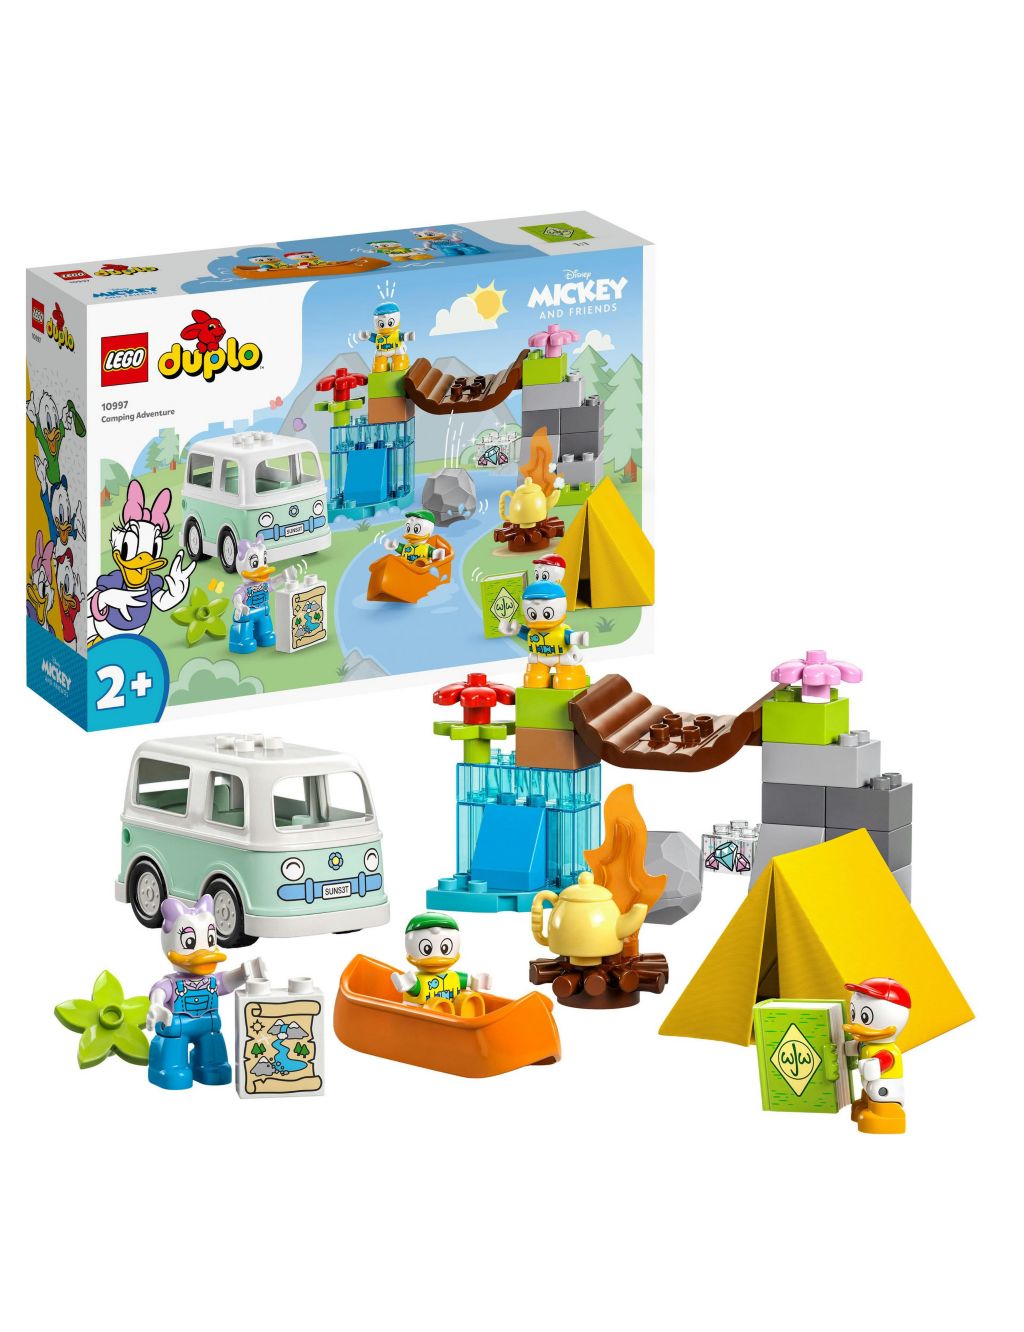 LEGO DUPLO Disney Mickey and Friends Camping Adventure 10997 (2+ Yrs) 3 of 6